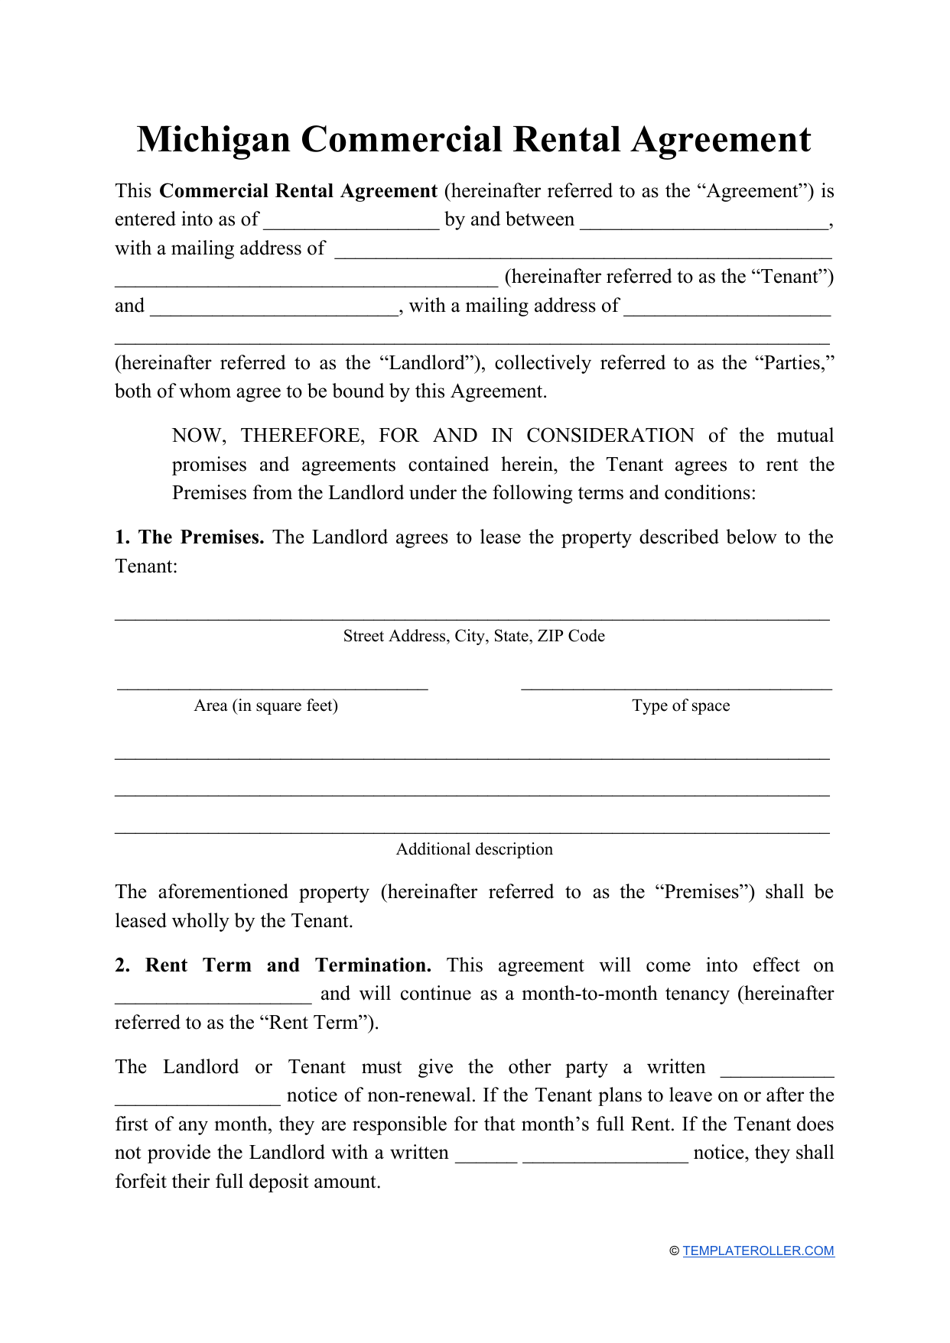 Commercial Rental Agreement Template - Michigan, Page 1